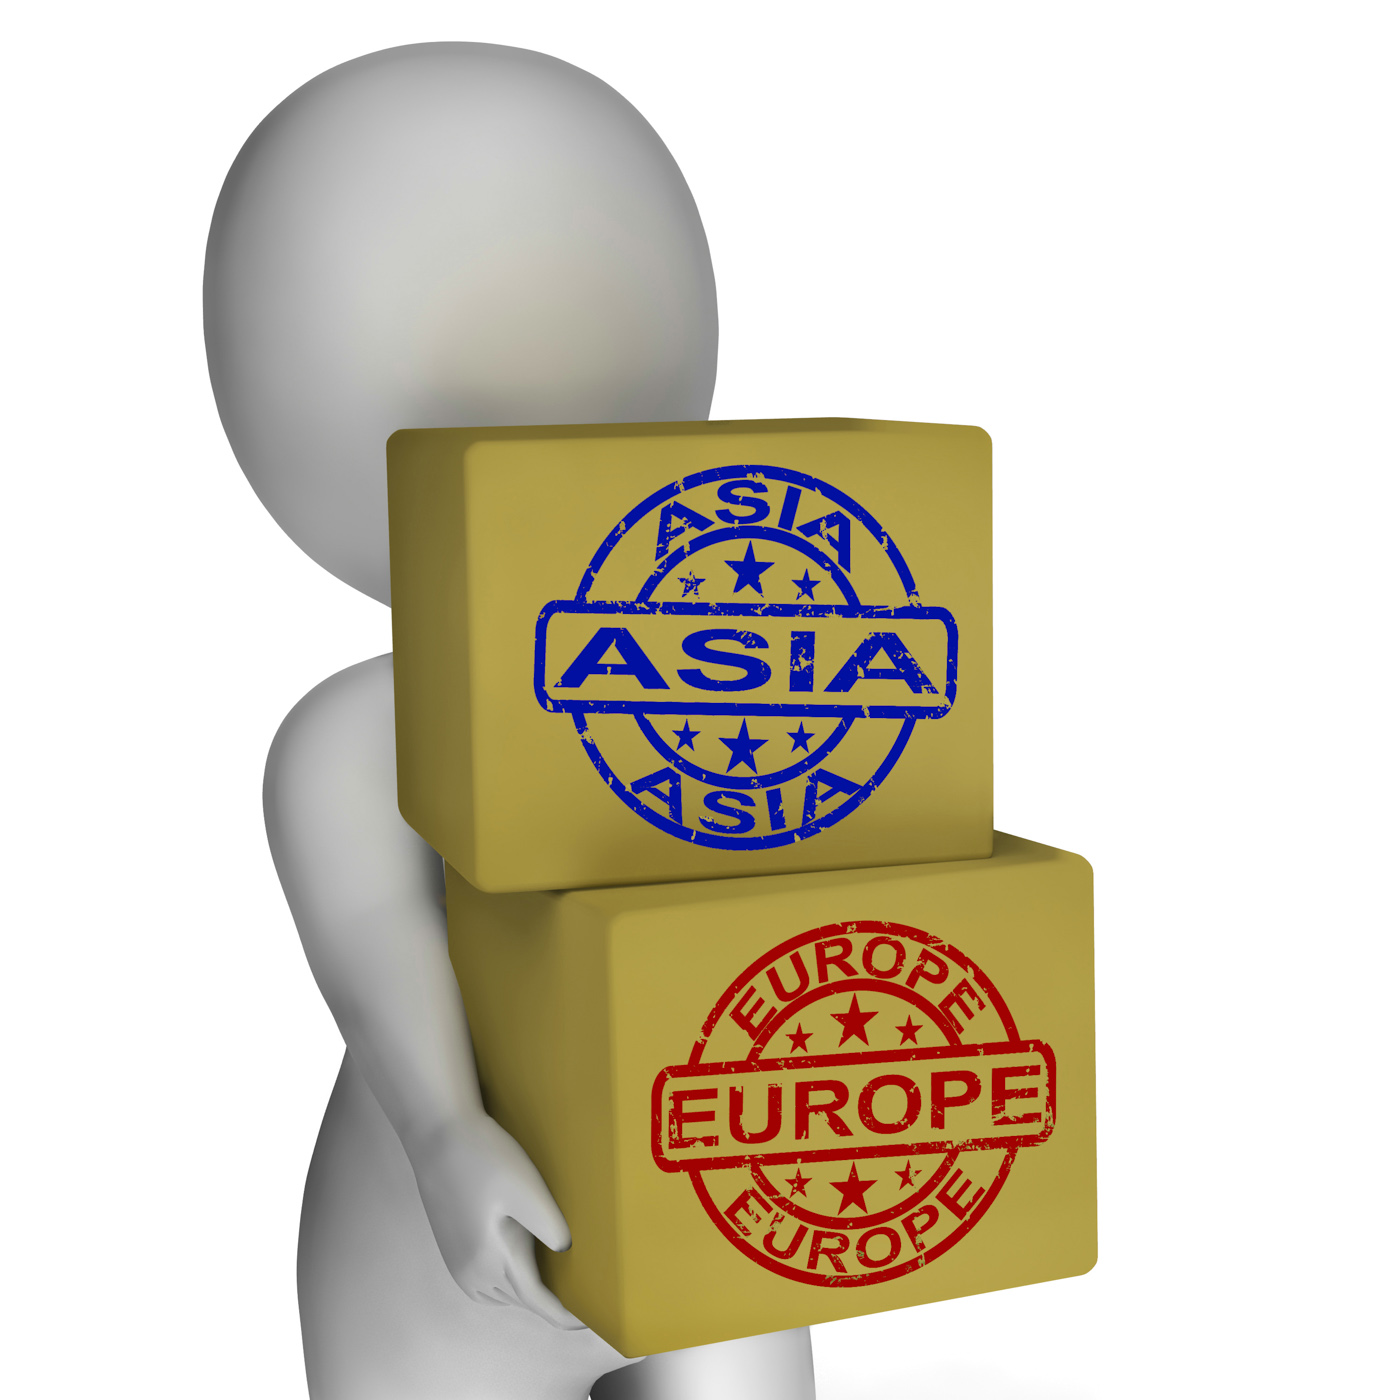 Europe asia import and export boxes mean international trade photo